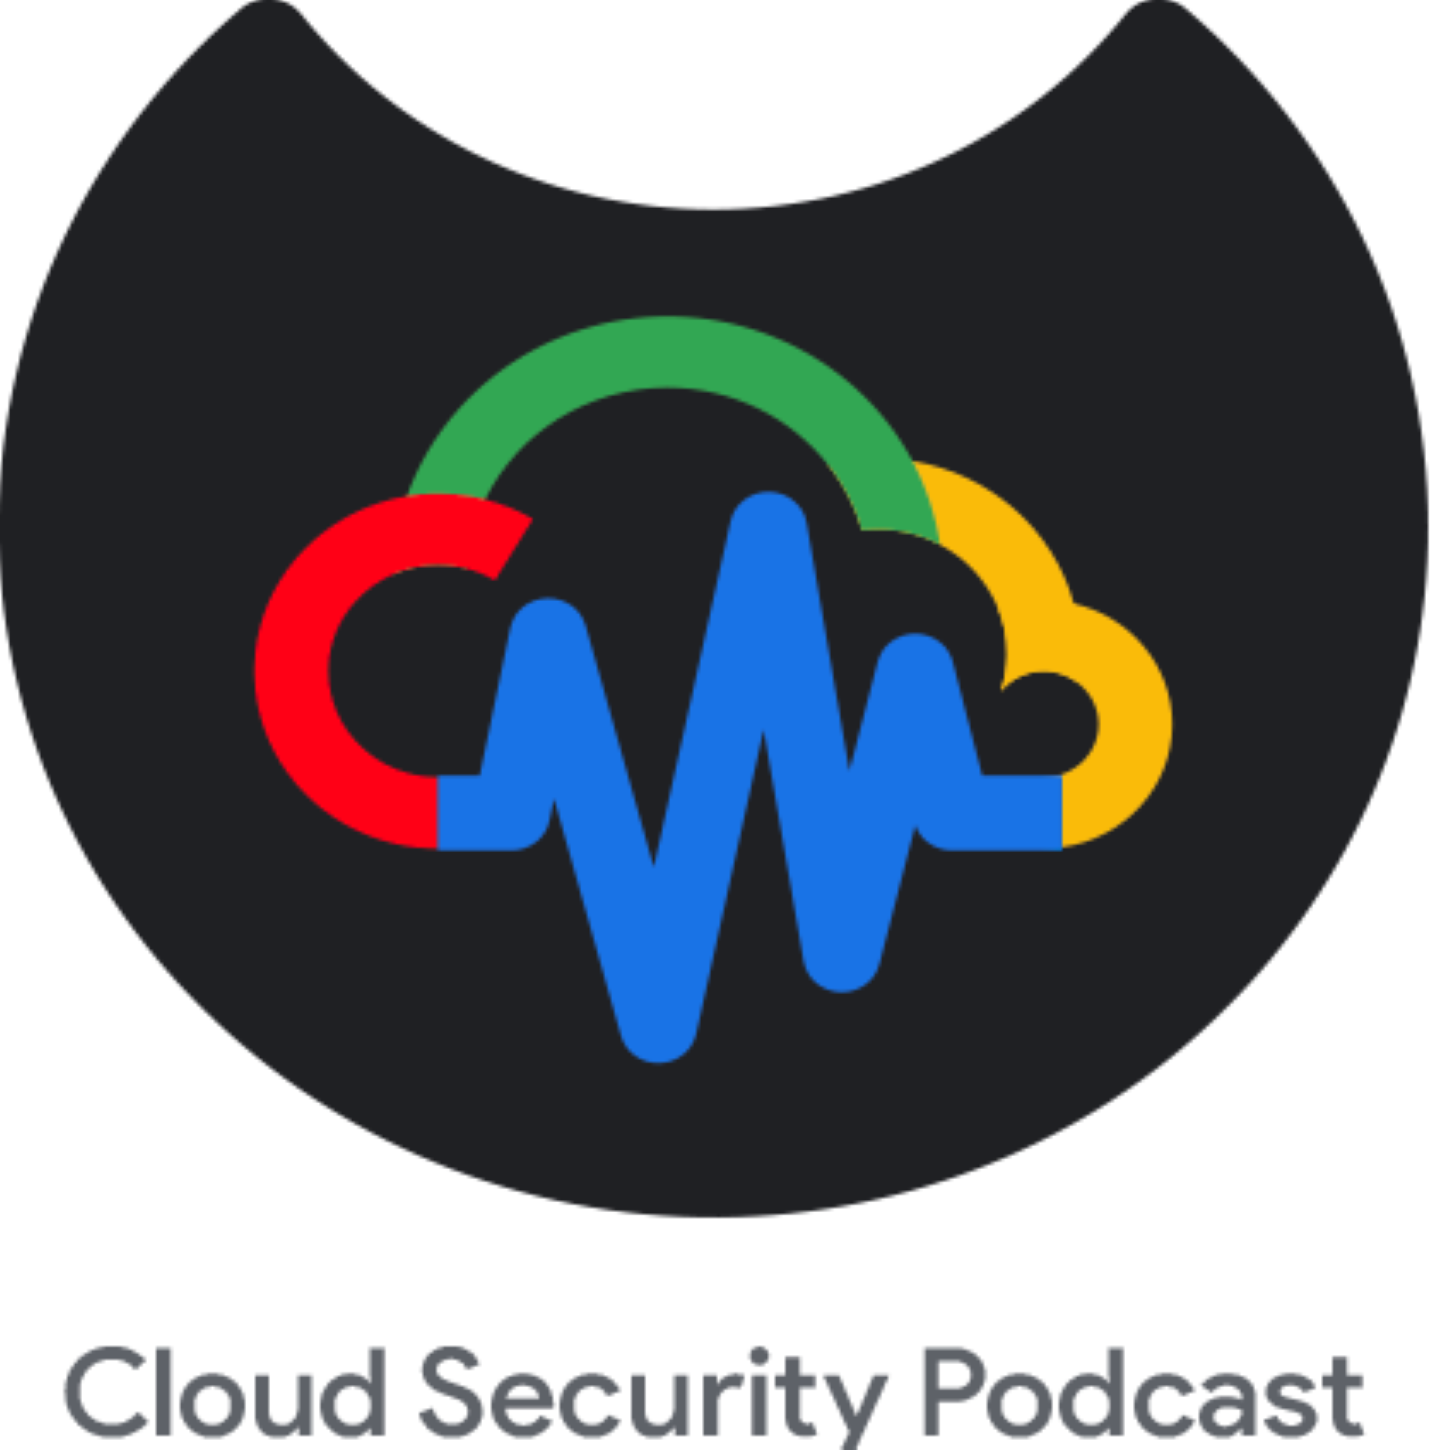 A highlight from EP136 Next 2023 Special: Building AI-powered Security Tools - How We Do It?